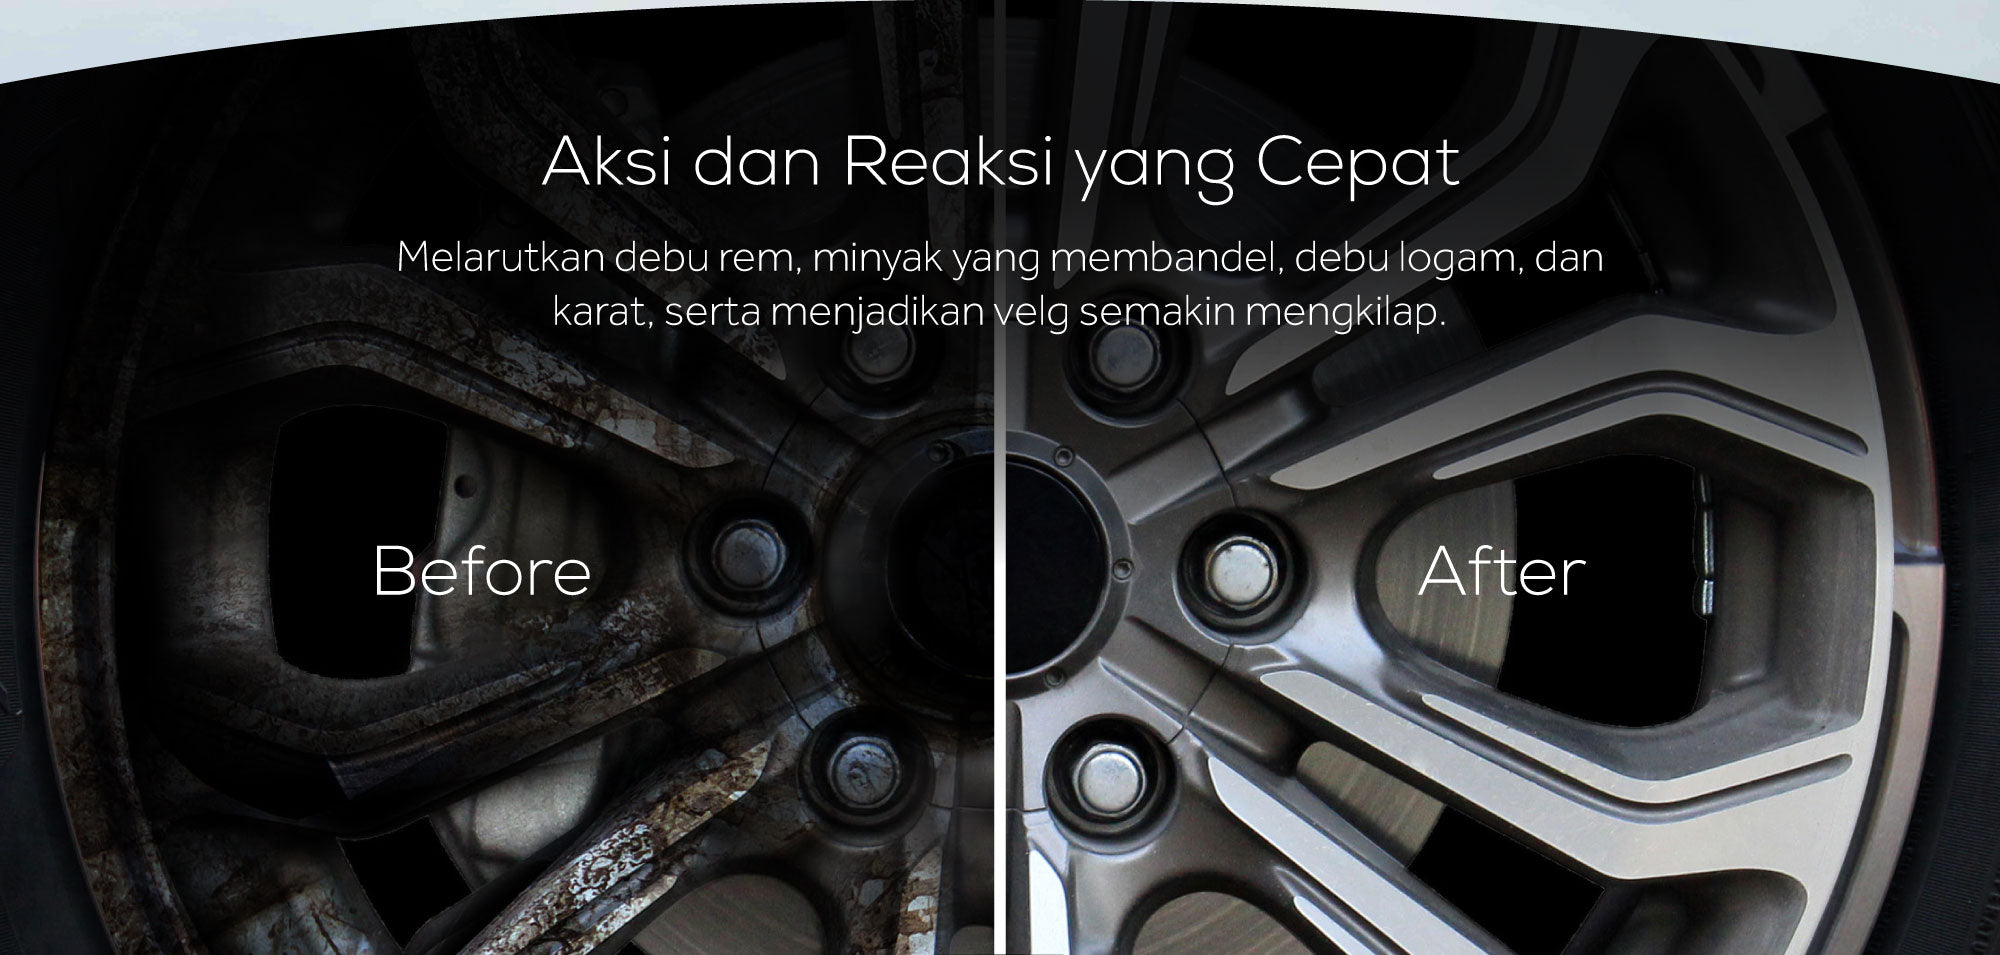 Protect before it happens.Protect your car before it gets rusty, faded and rought to the touch.